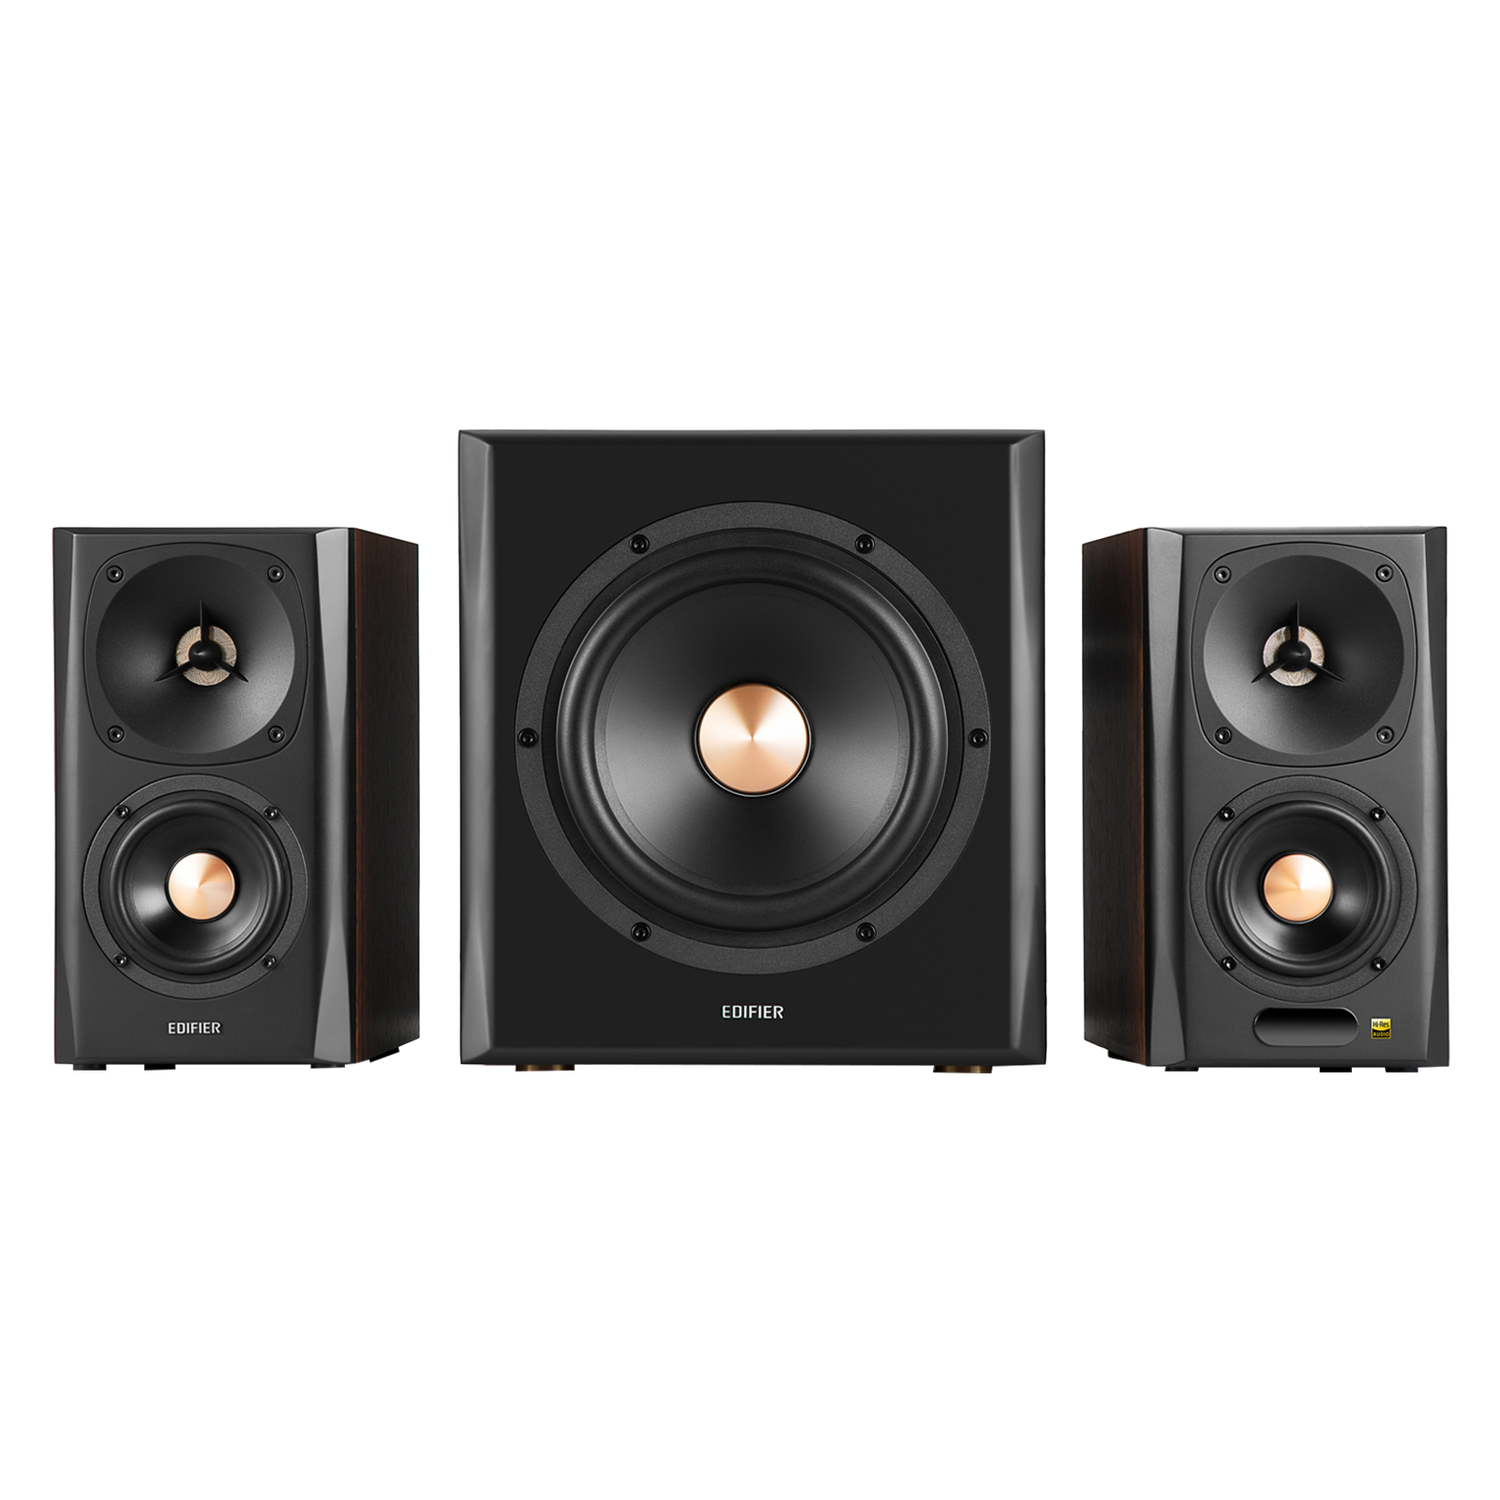 S360DB 2.1 Speakers Hi-Res Audio with wireless subwoofer (Certified Refurbished)